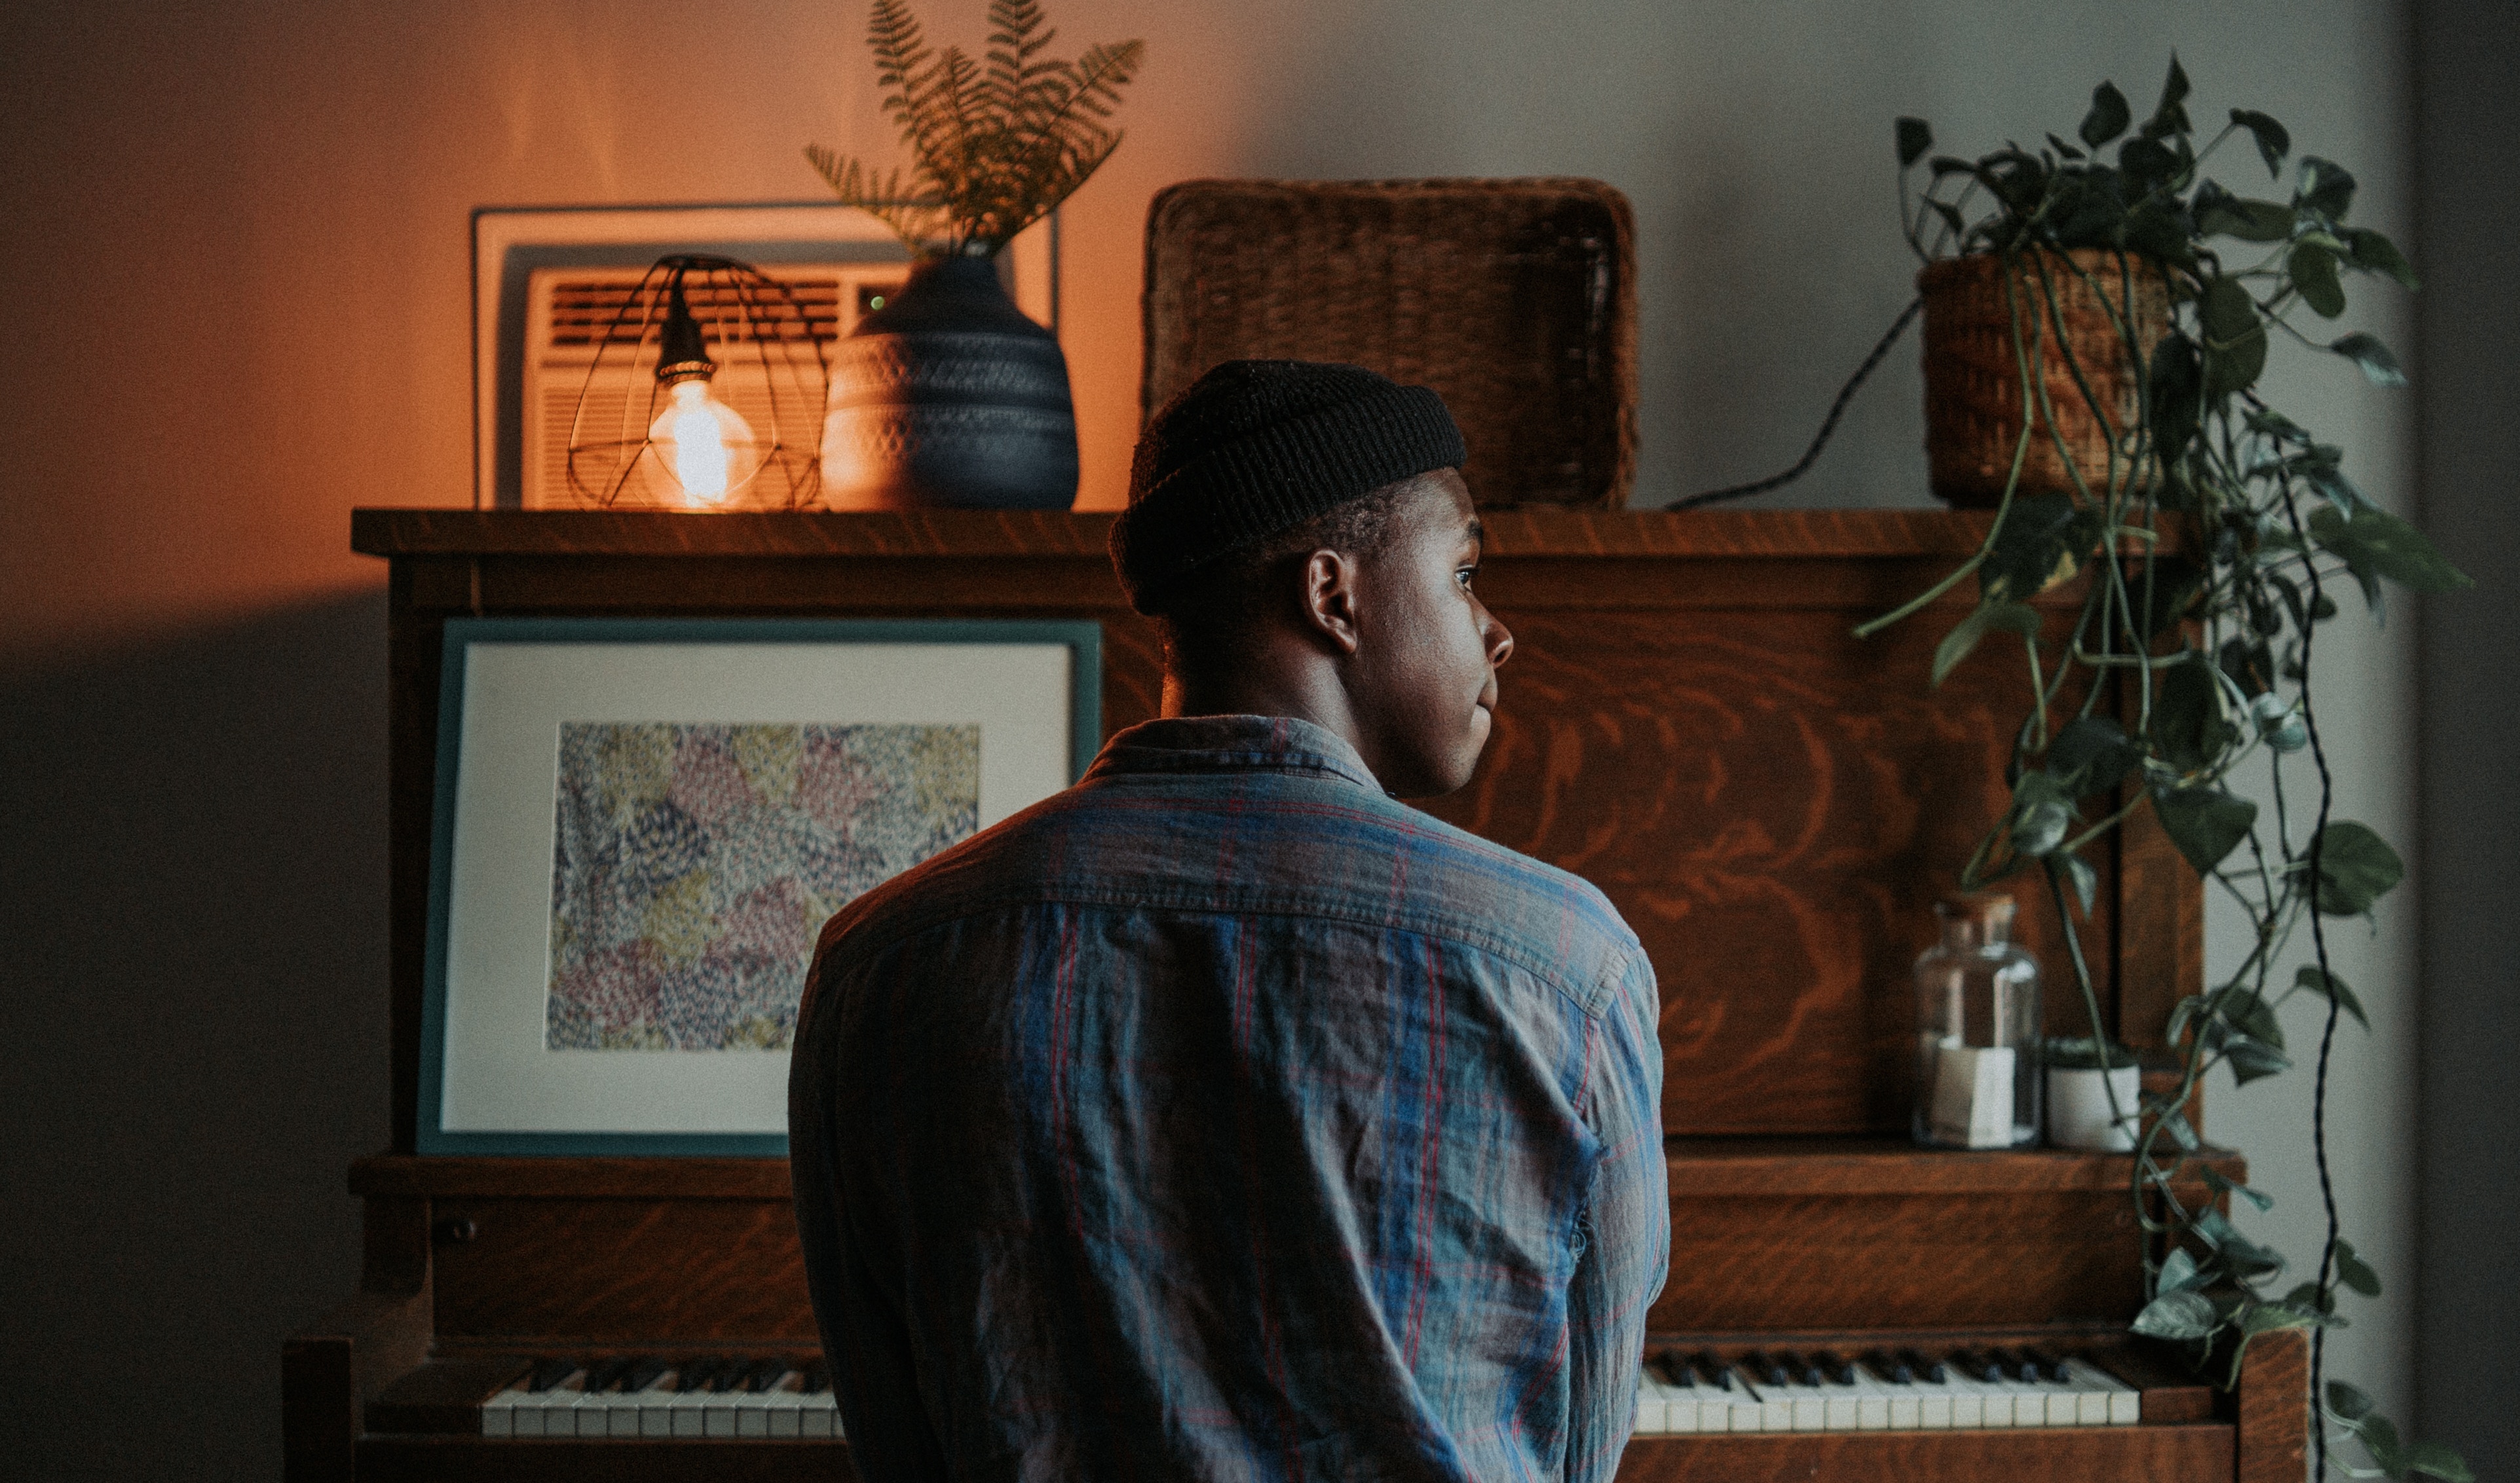 Man sitting at the piano Photo by George Coletrain on Unsplash